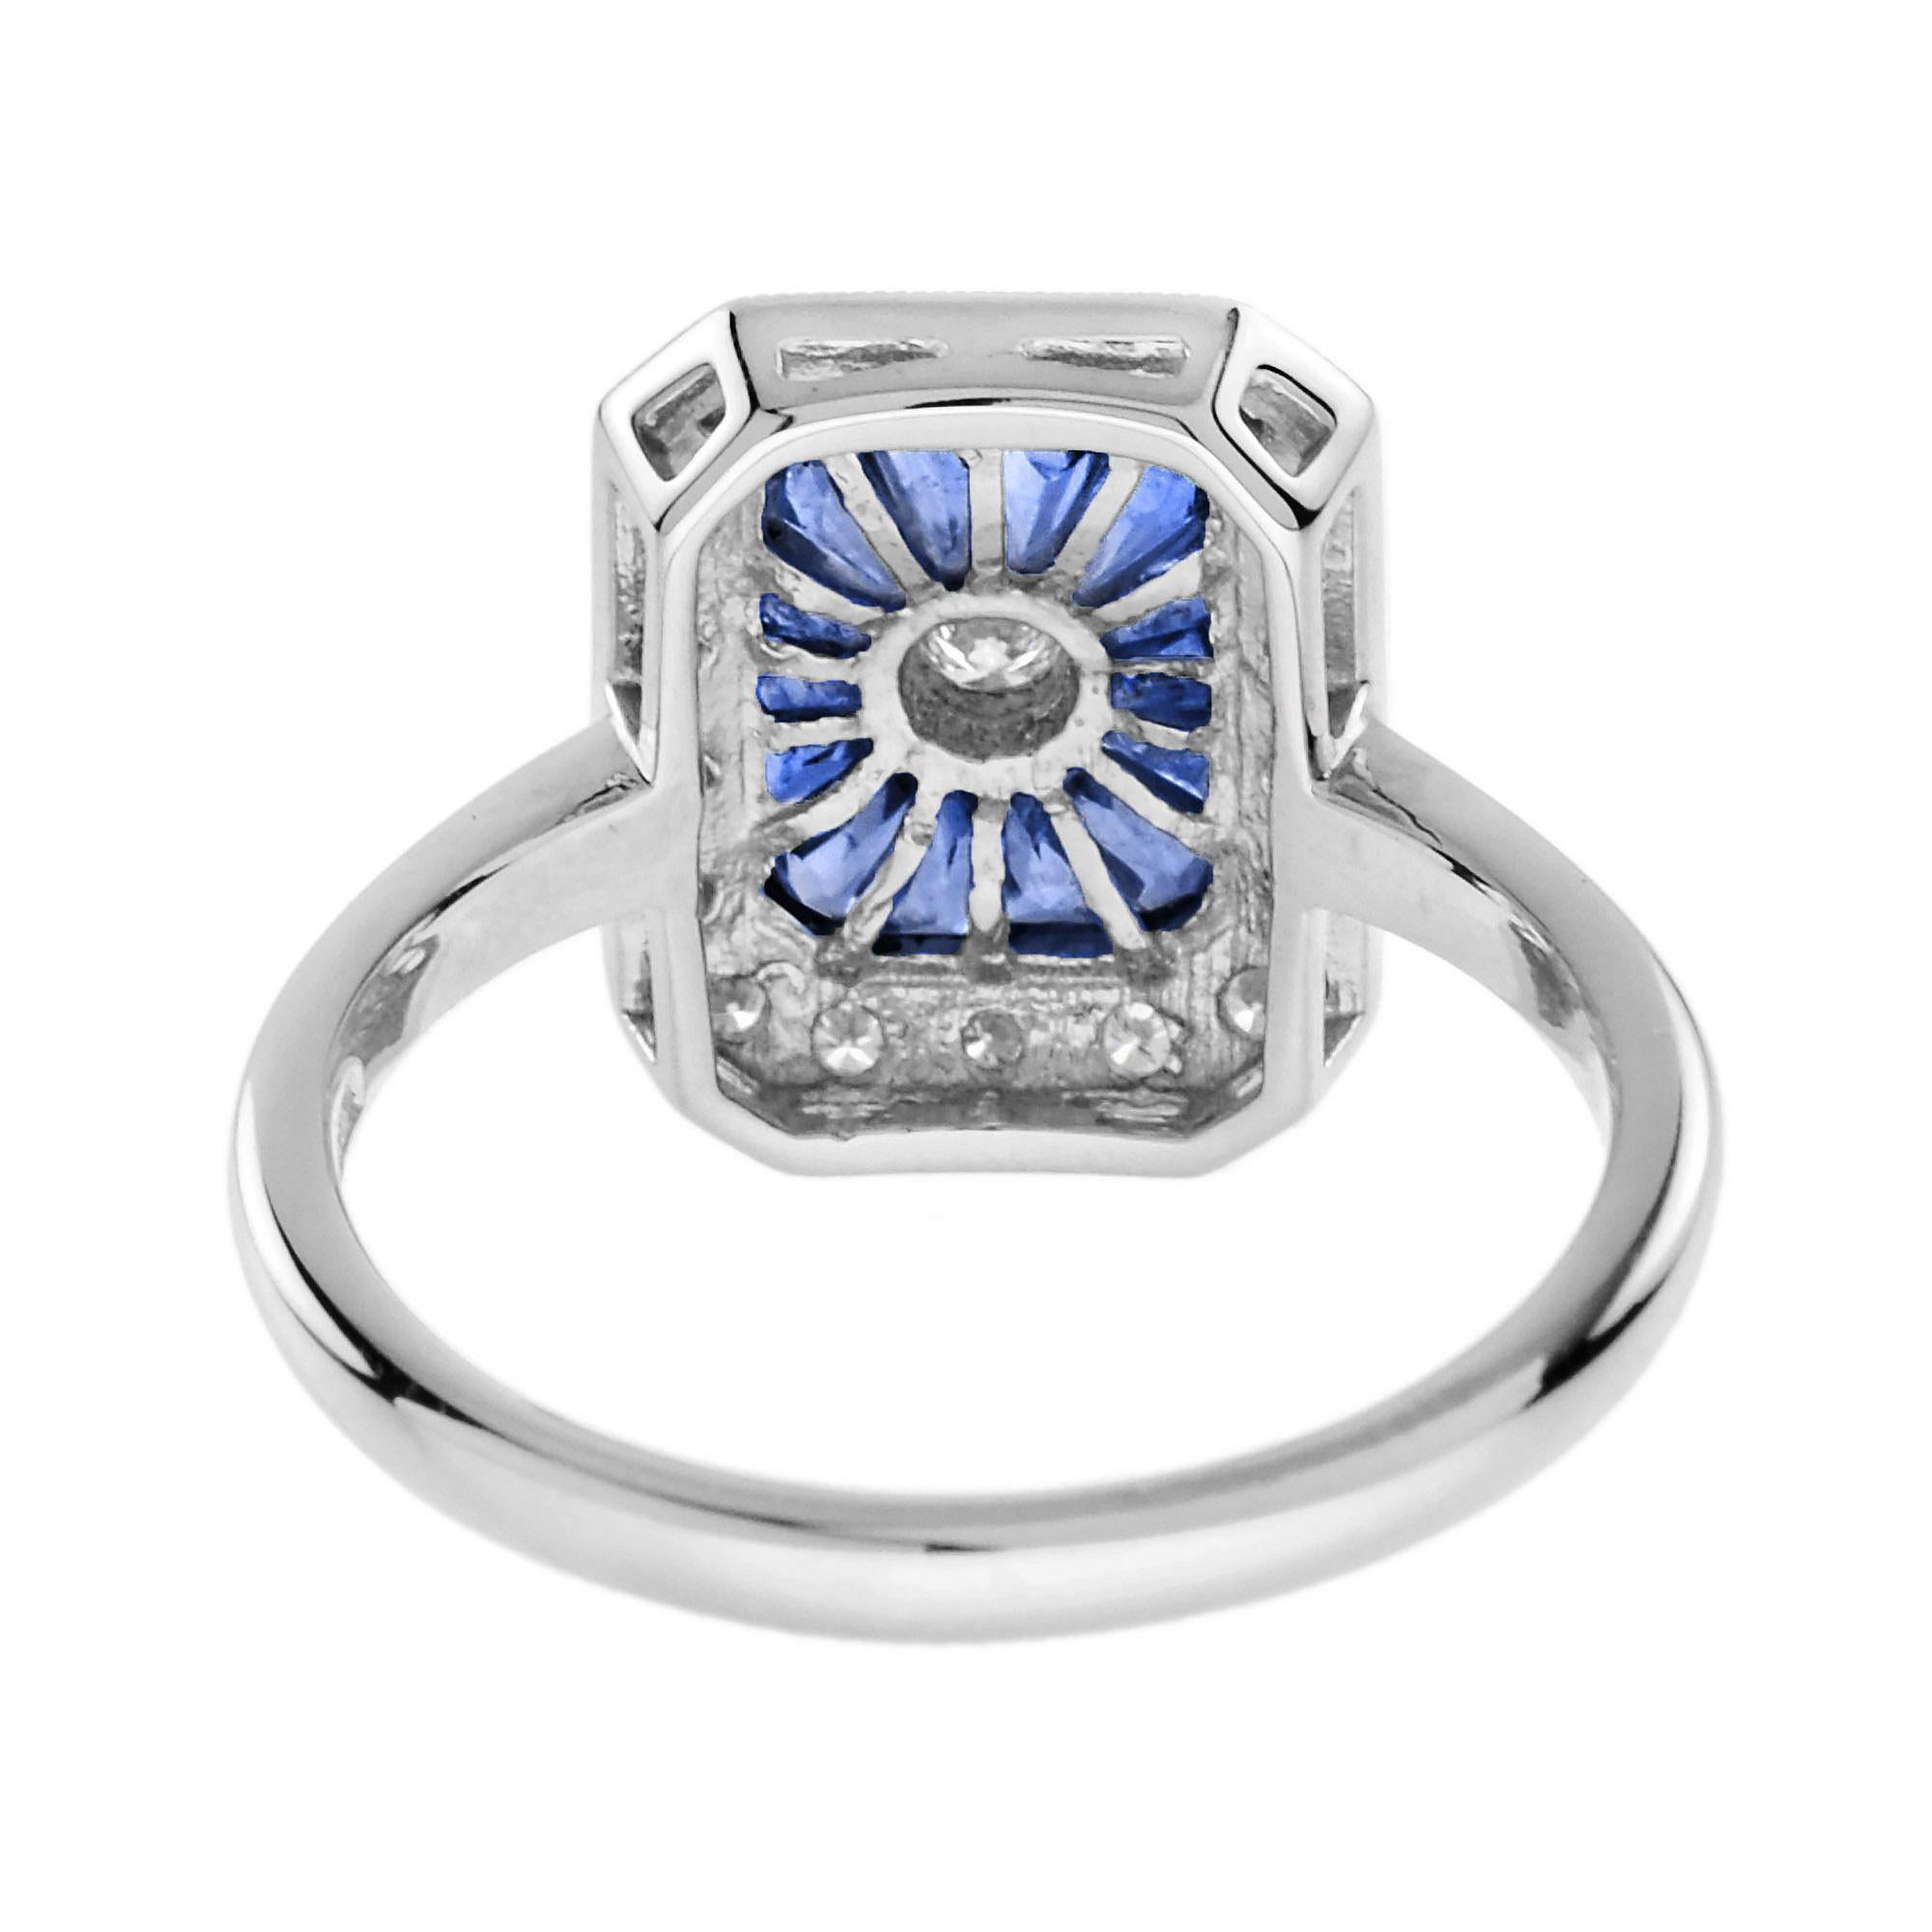 Women's Diamond and Sapphire Art Deco Style Engagement Ring in 9K White Gold